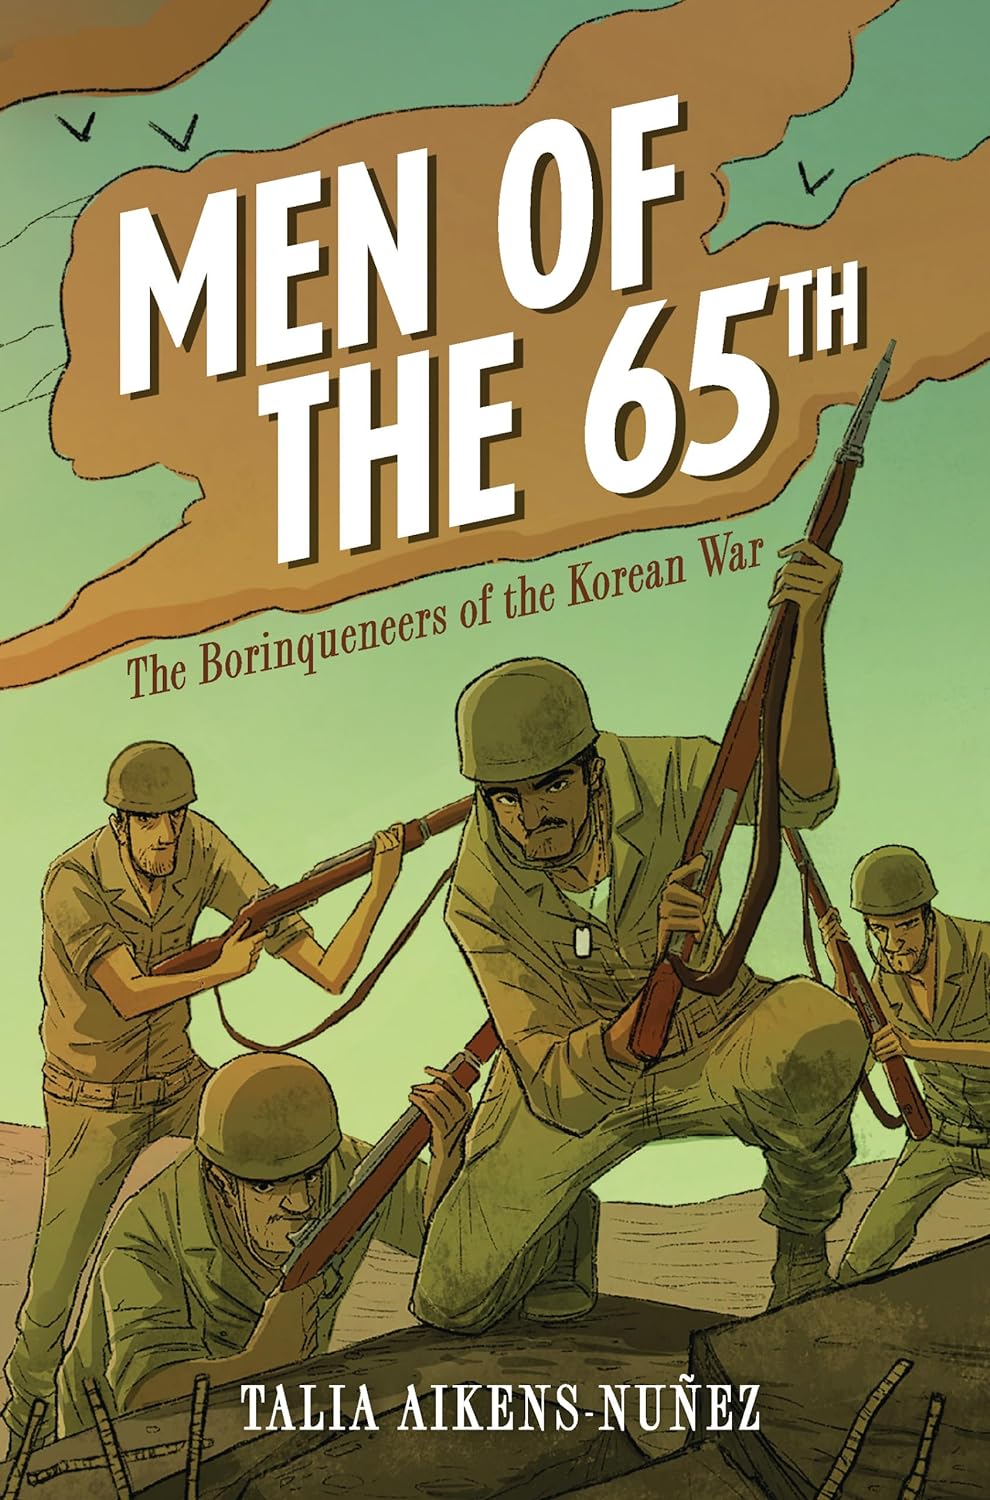 Men of the 65th: The Borinqueneers of the Korean War Paperback